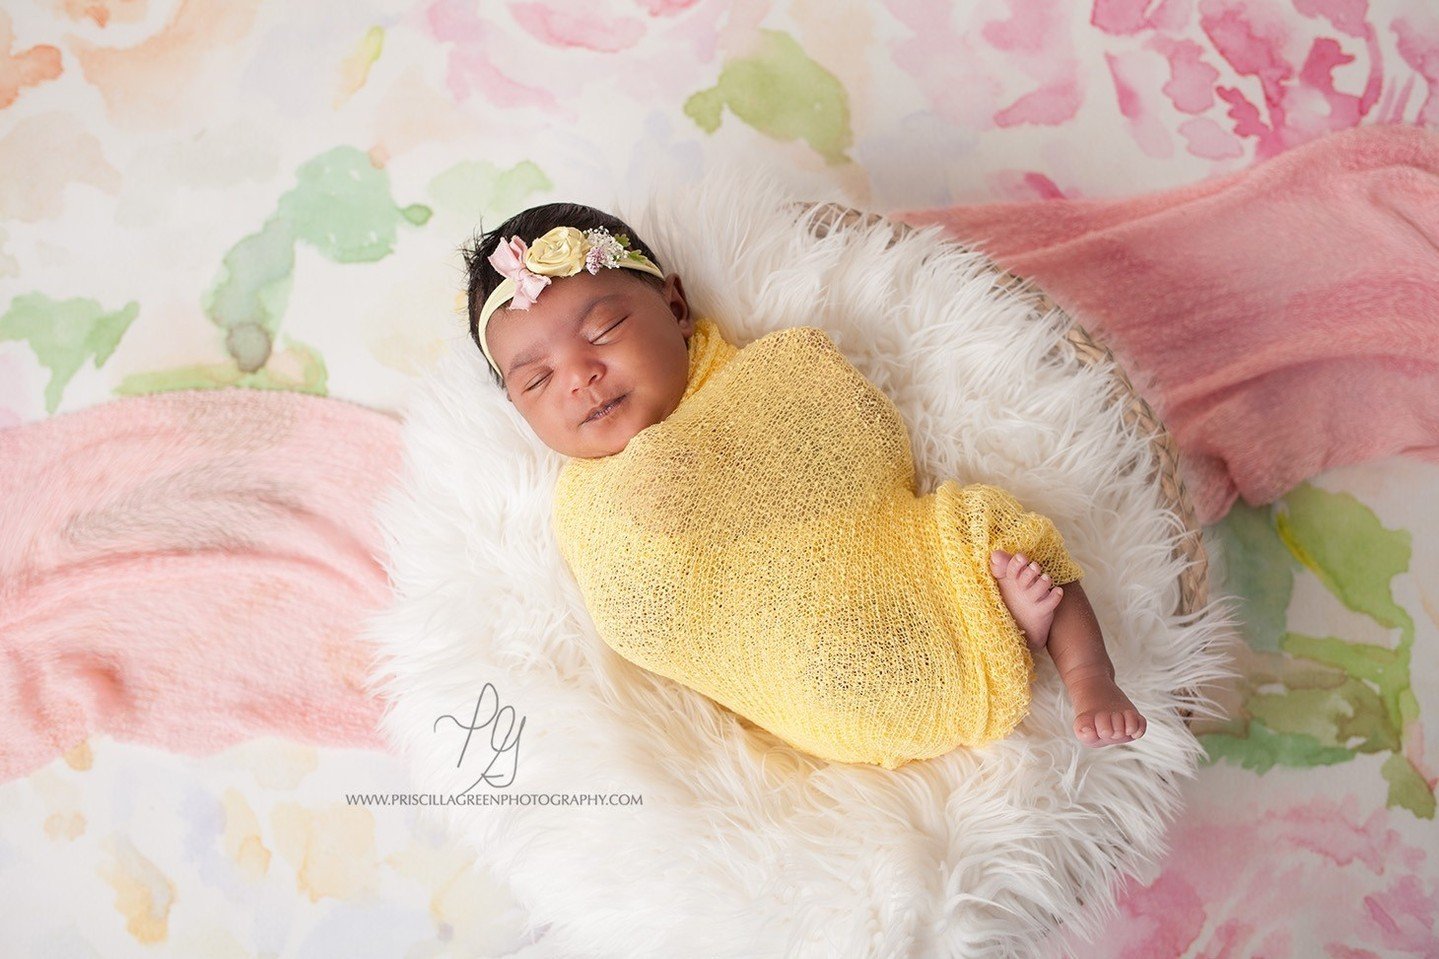 📸 Capturing priceless moments since 2013!⁠
⁠
Book your session online ⬇️⁠
https://priscillagreenphotography.com/studio-booking⁠
⁠
⁠
#NewbornPhotography #ProfessionalExperience #PreciousMoments